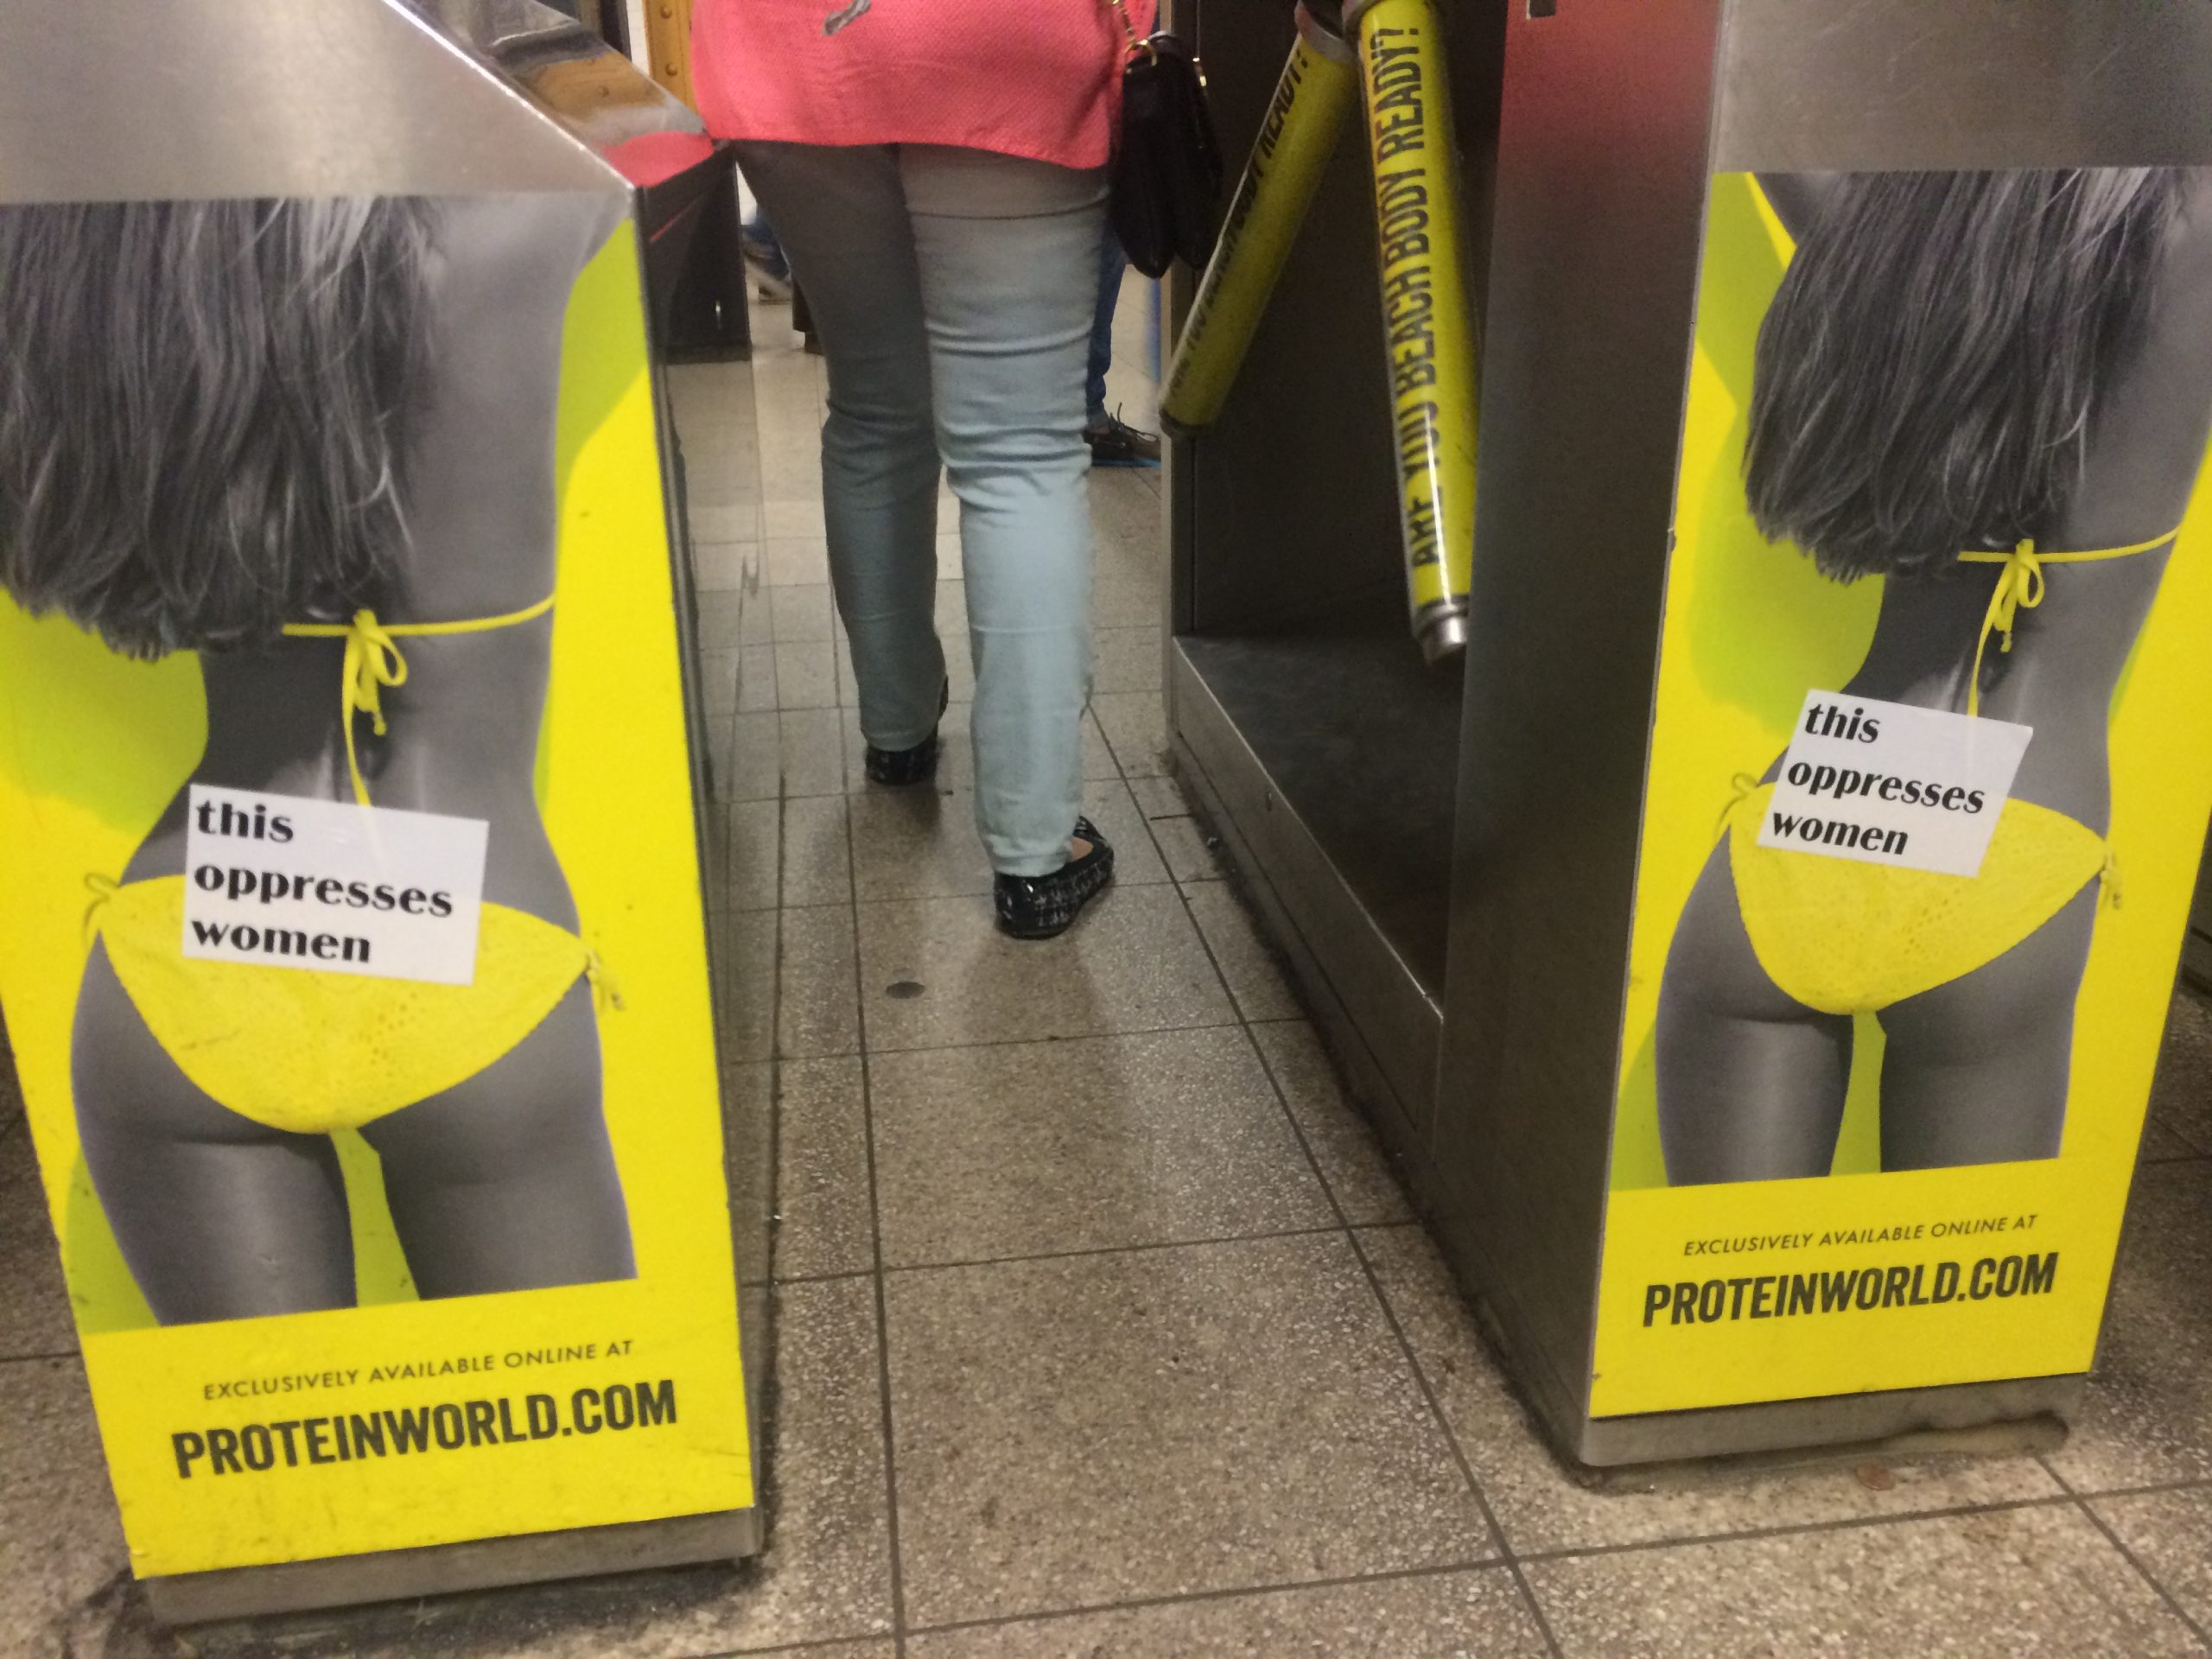 This Oppresses Women stickers on sexist ads